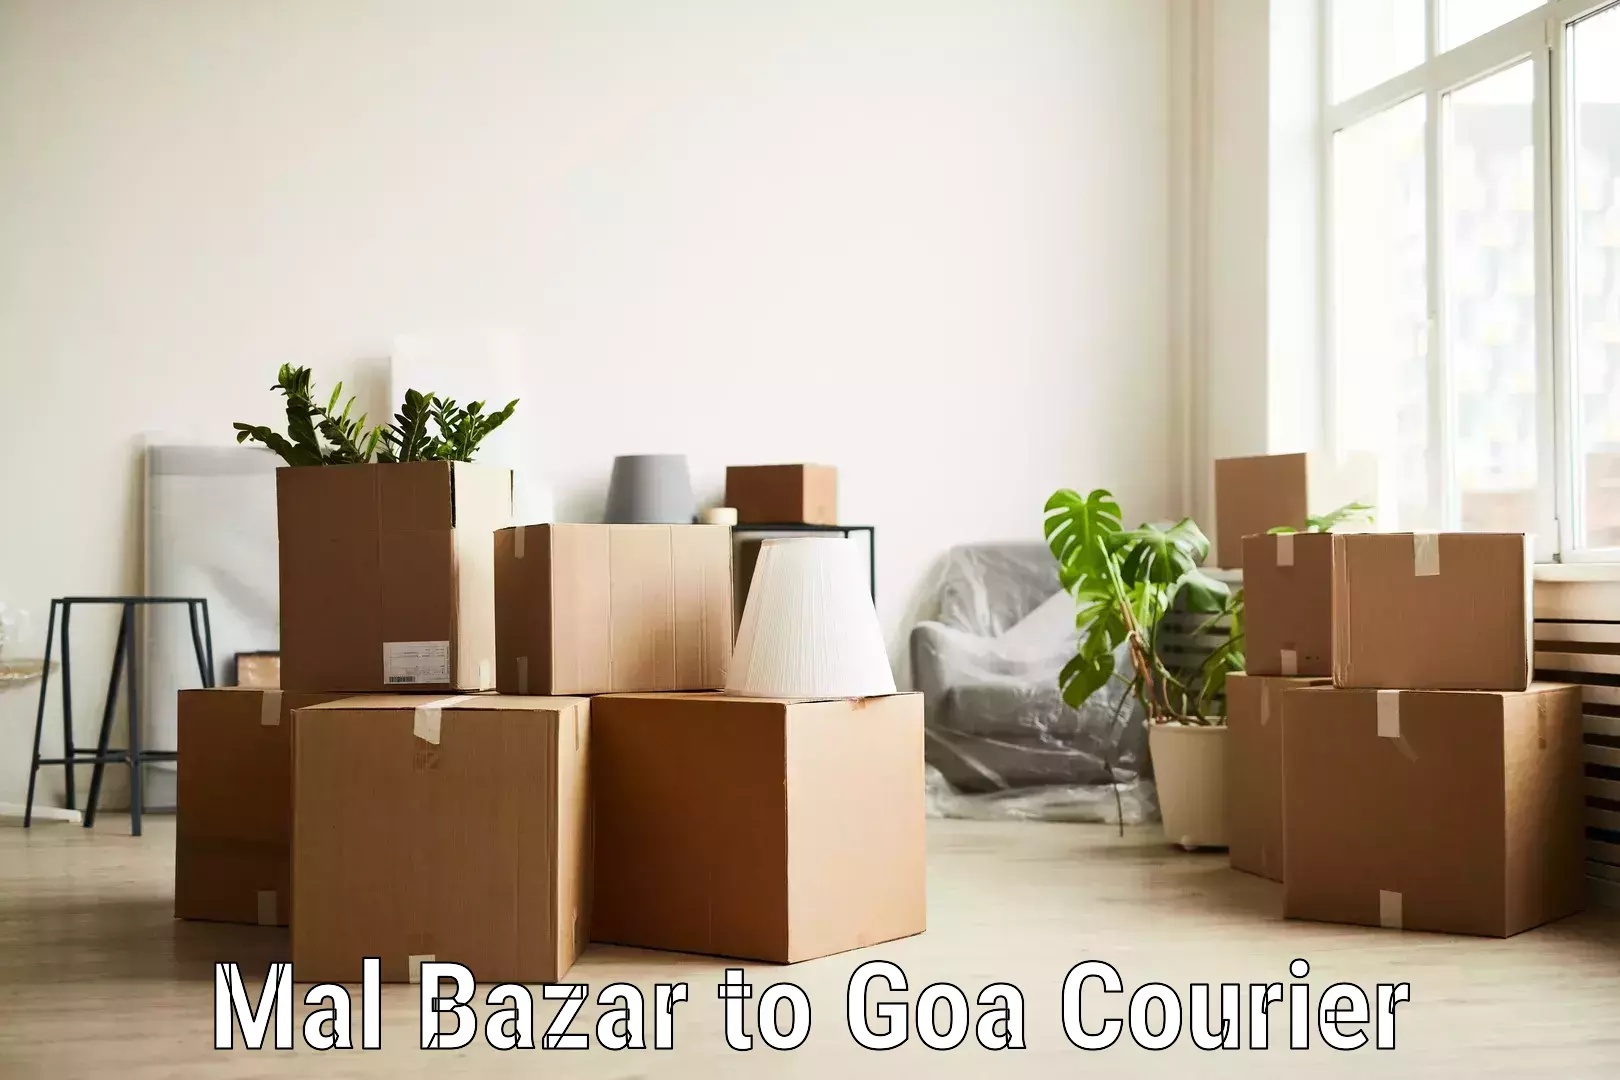 Delivery service partnership in Mal Bazar to Goa